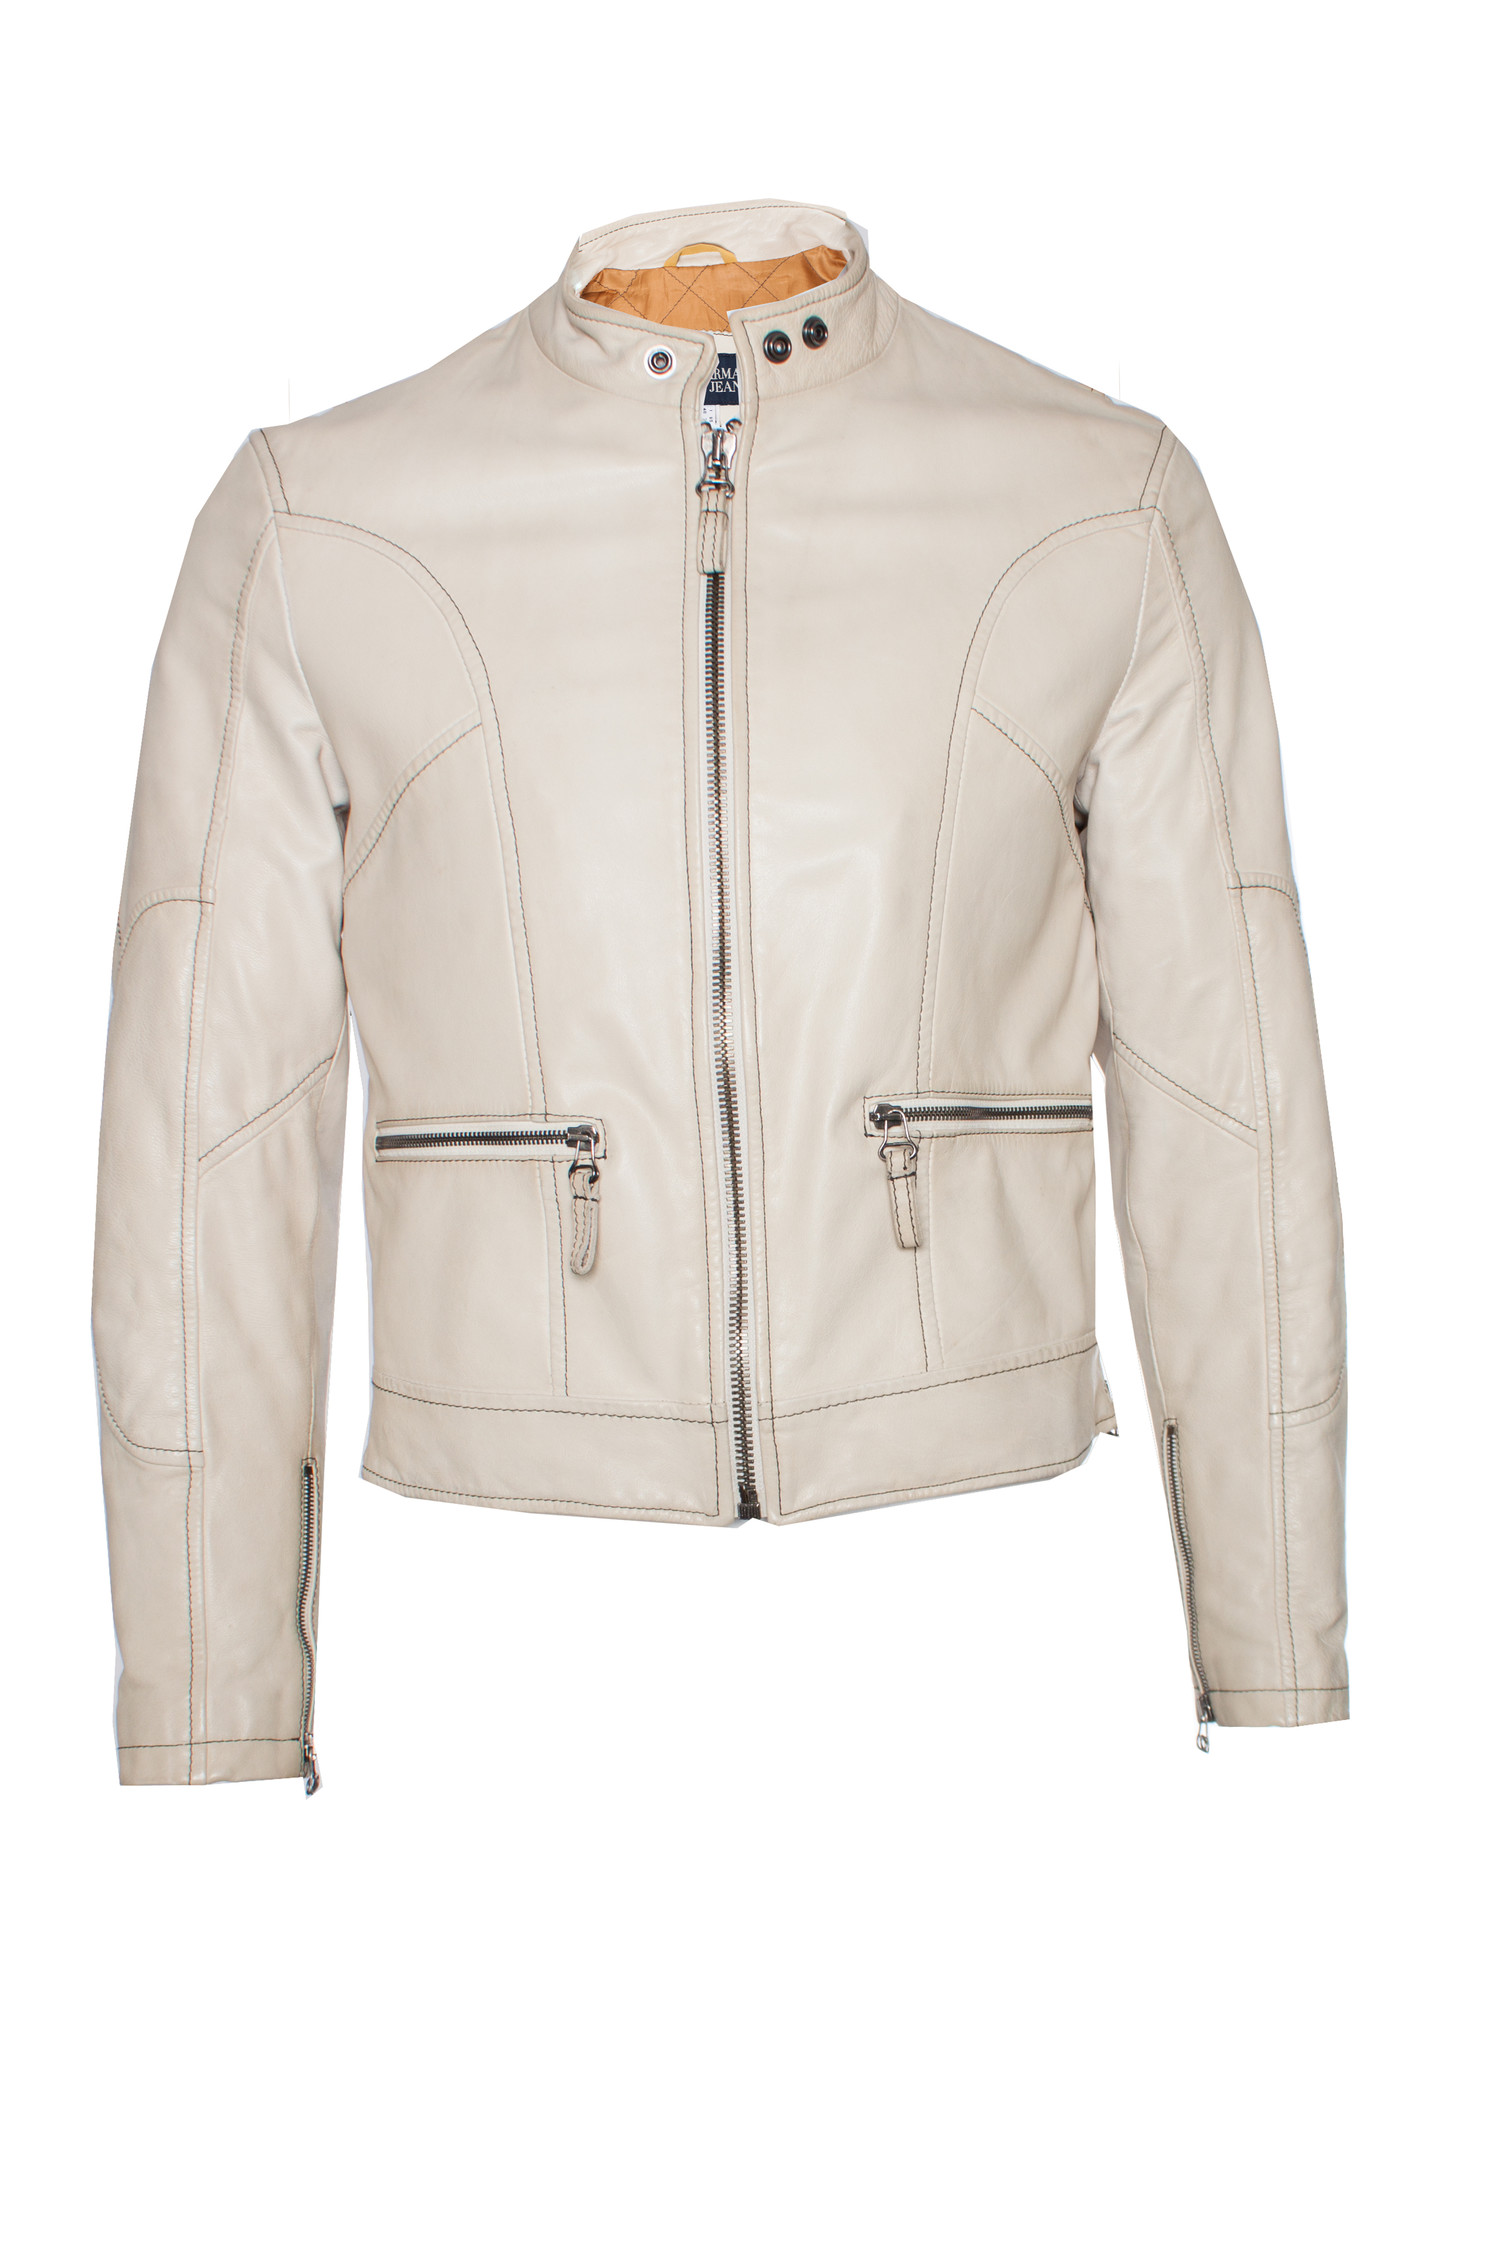 Armani Jeans, off-white leather jacket 